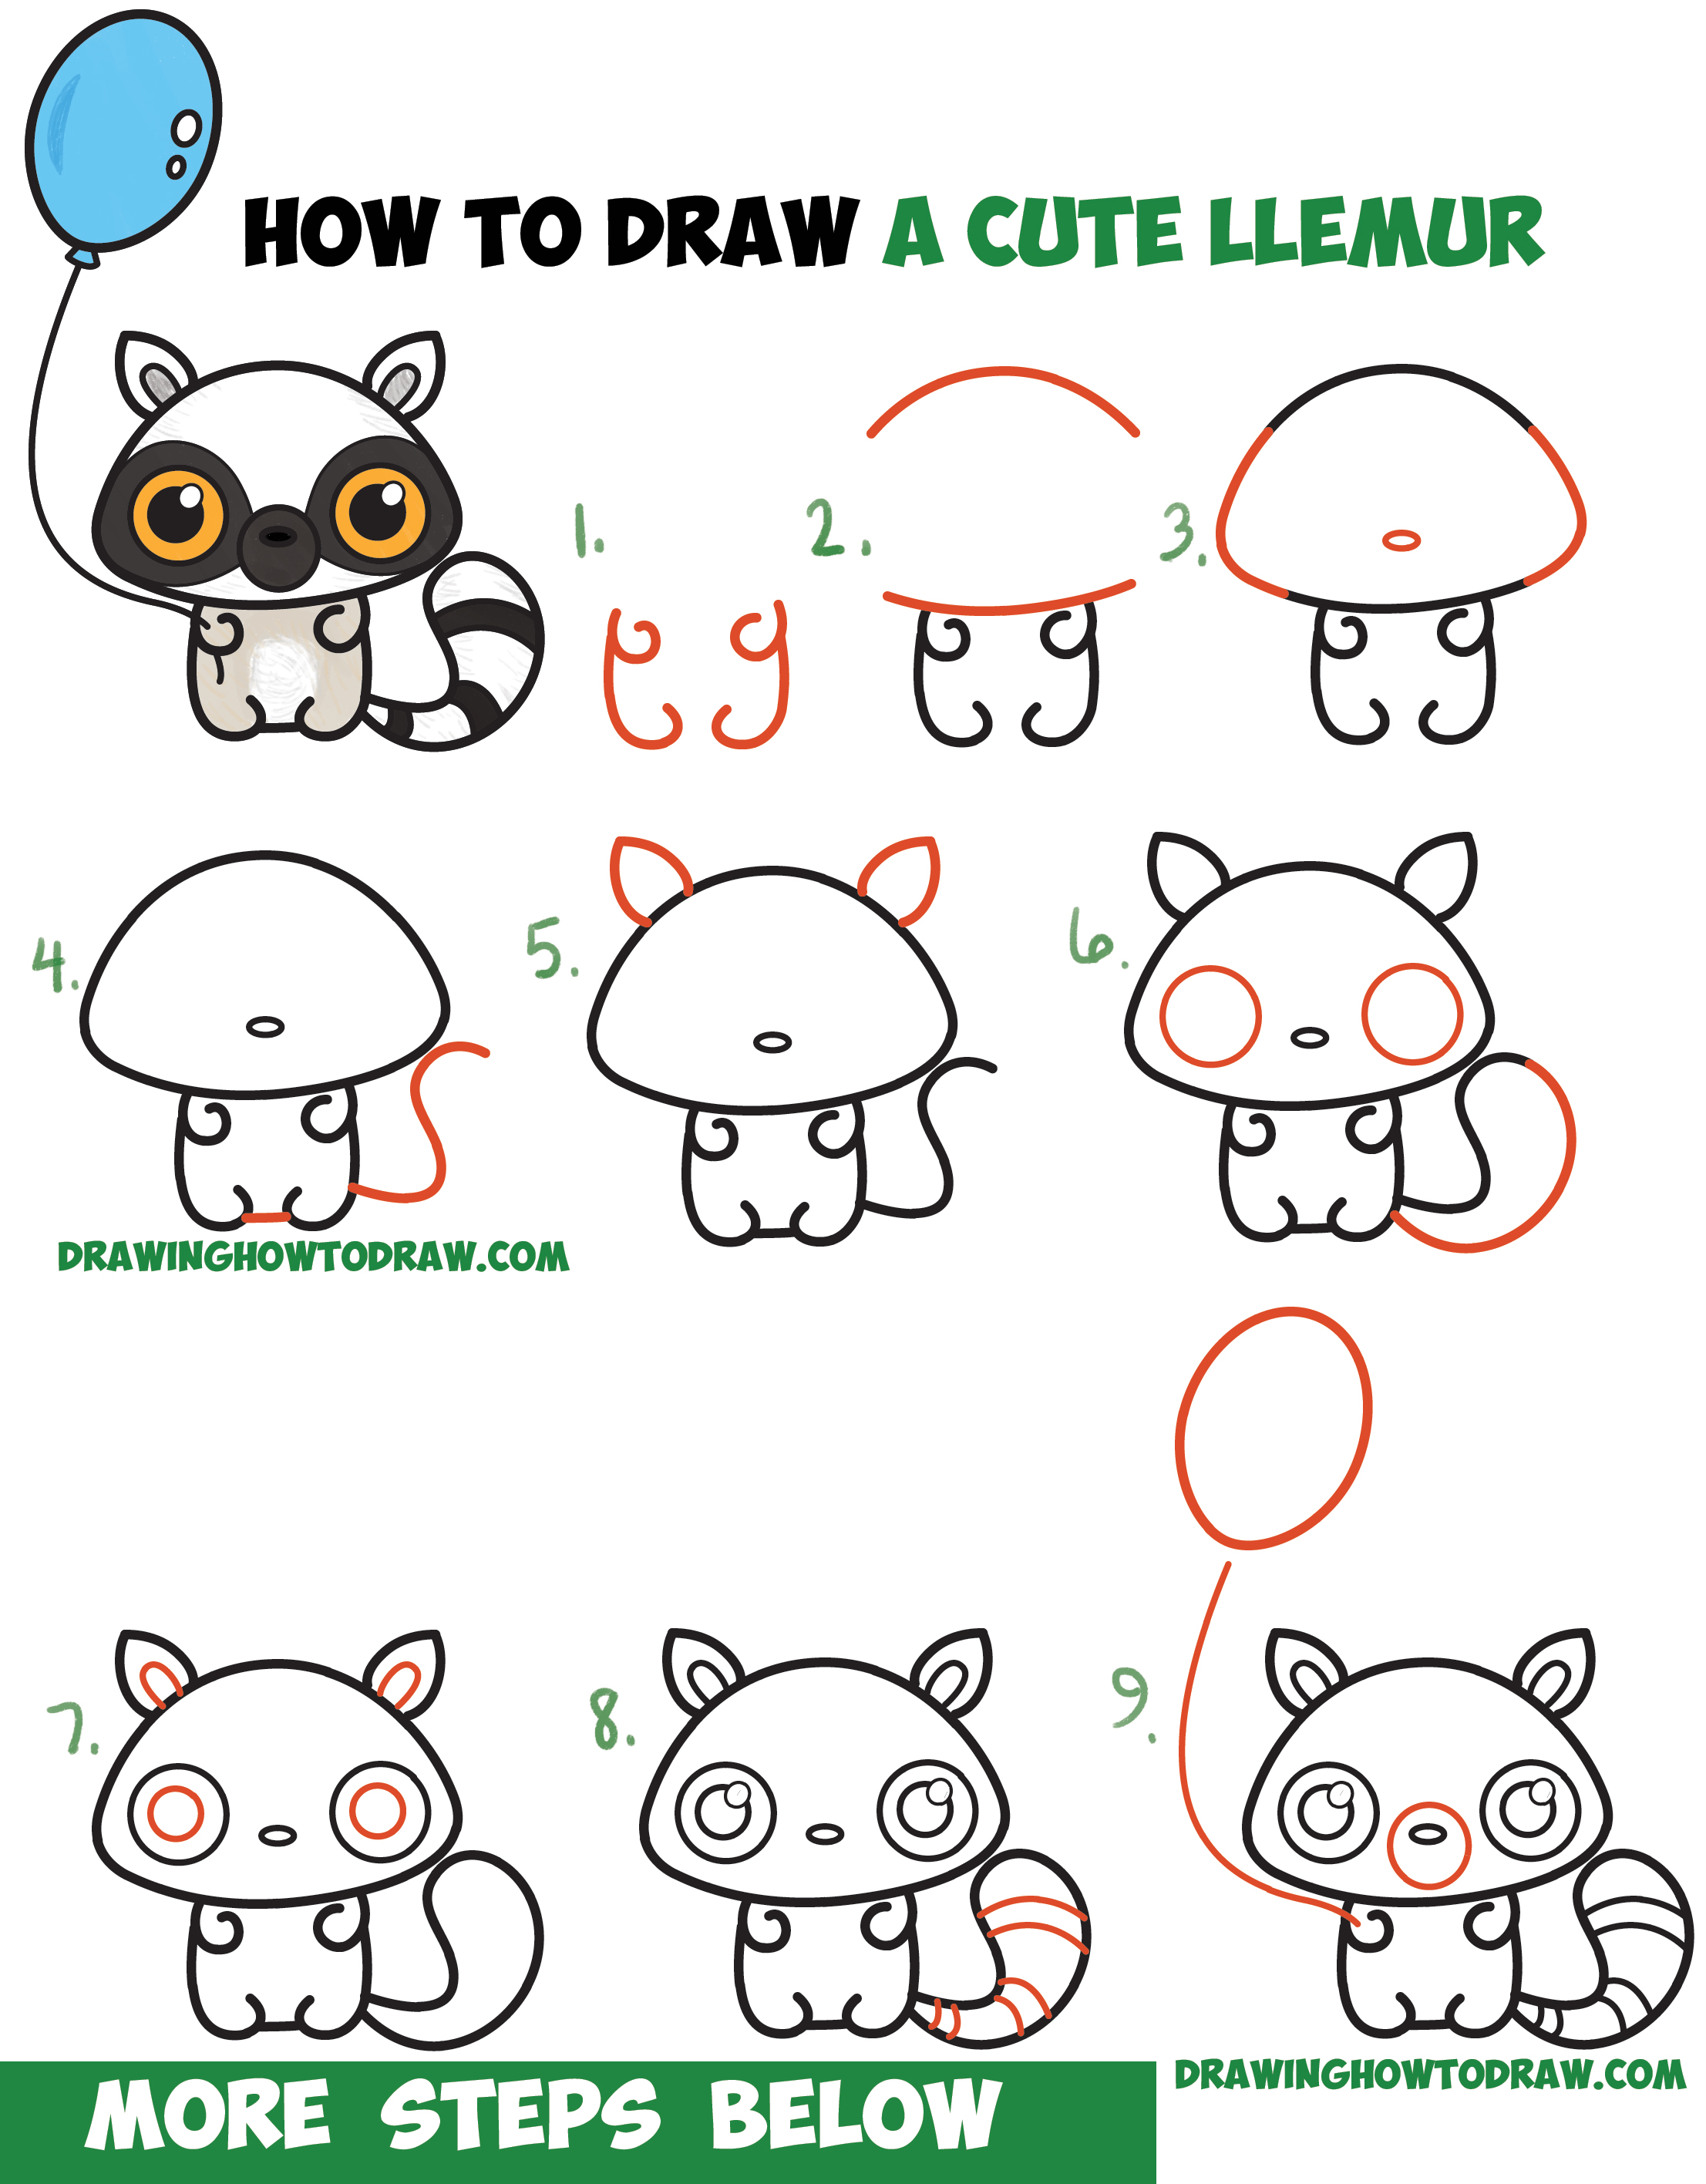 How to Draw a Cute Cartoon Llemur (Kawaii / Chibi) with Easy Step by Step Drawing Tutorial for Kids & Beginners